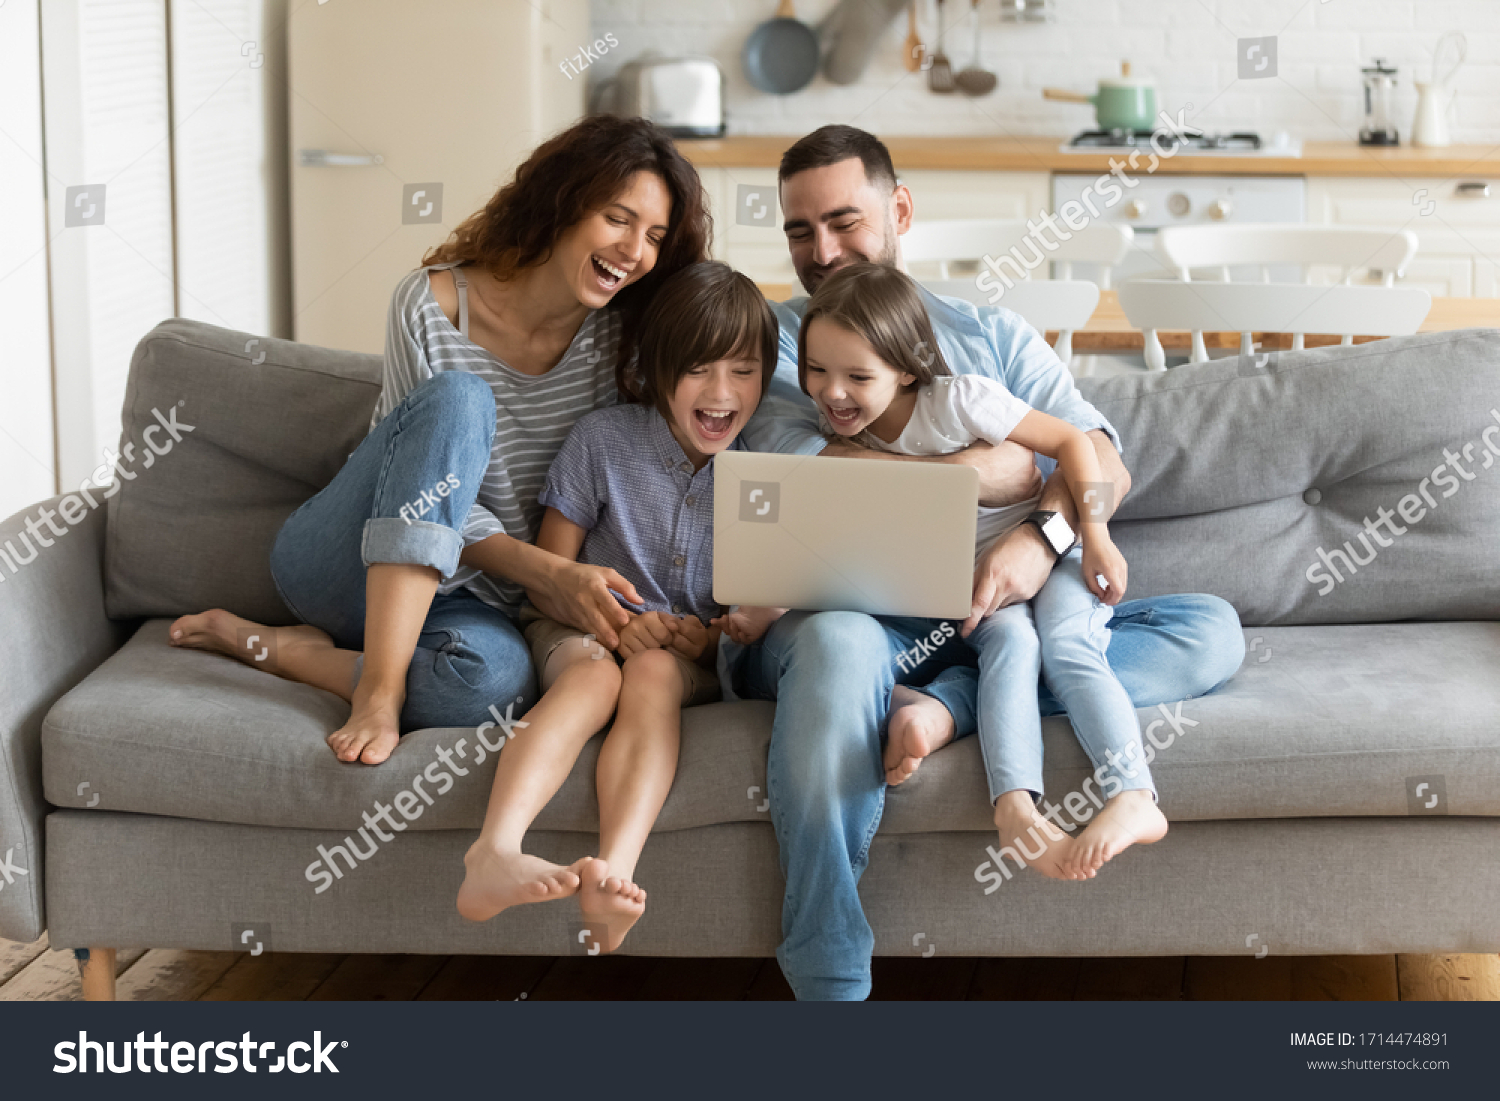 Overjoyed kids sitting on sofa with cheerful parents, watching funny video on computer. Happy married couple enjoying spending weekend time with small children, laughing looking at laptop screen. #1714474891